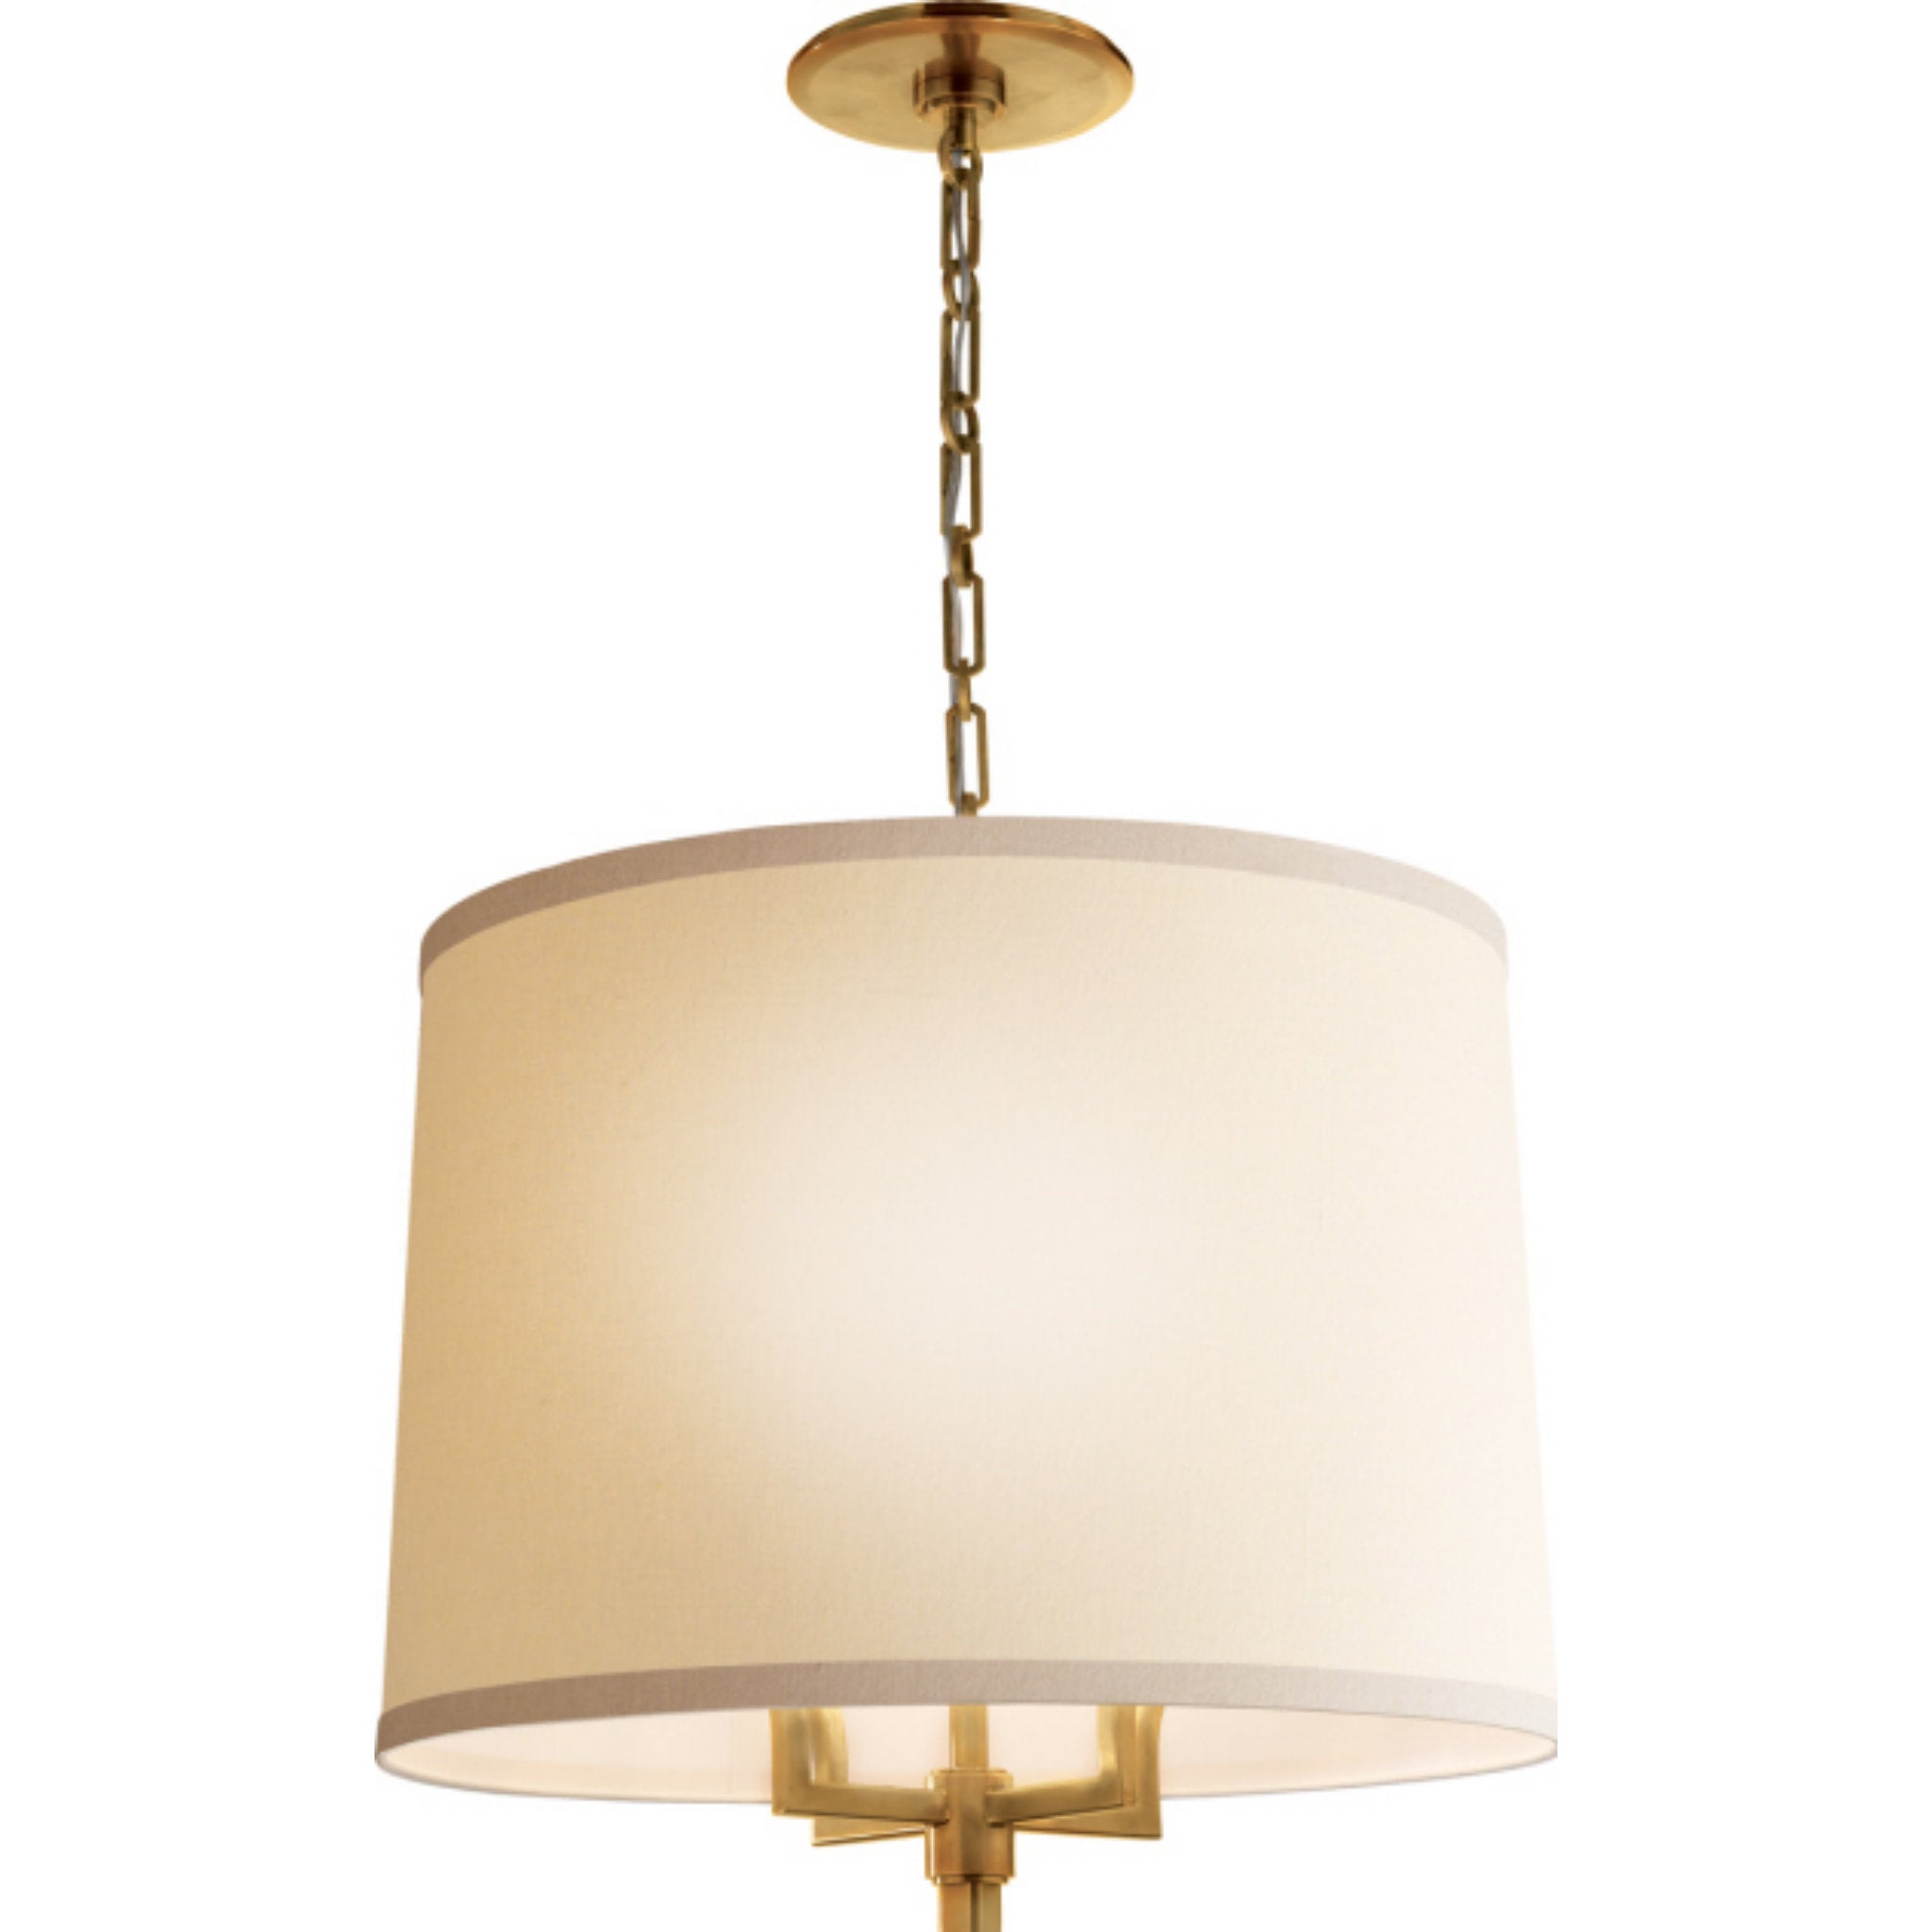 Barbara Barry Westport Large Hanging Shade in Soft Brass with Linen Shade